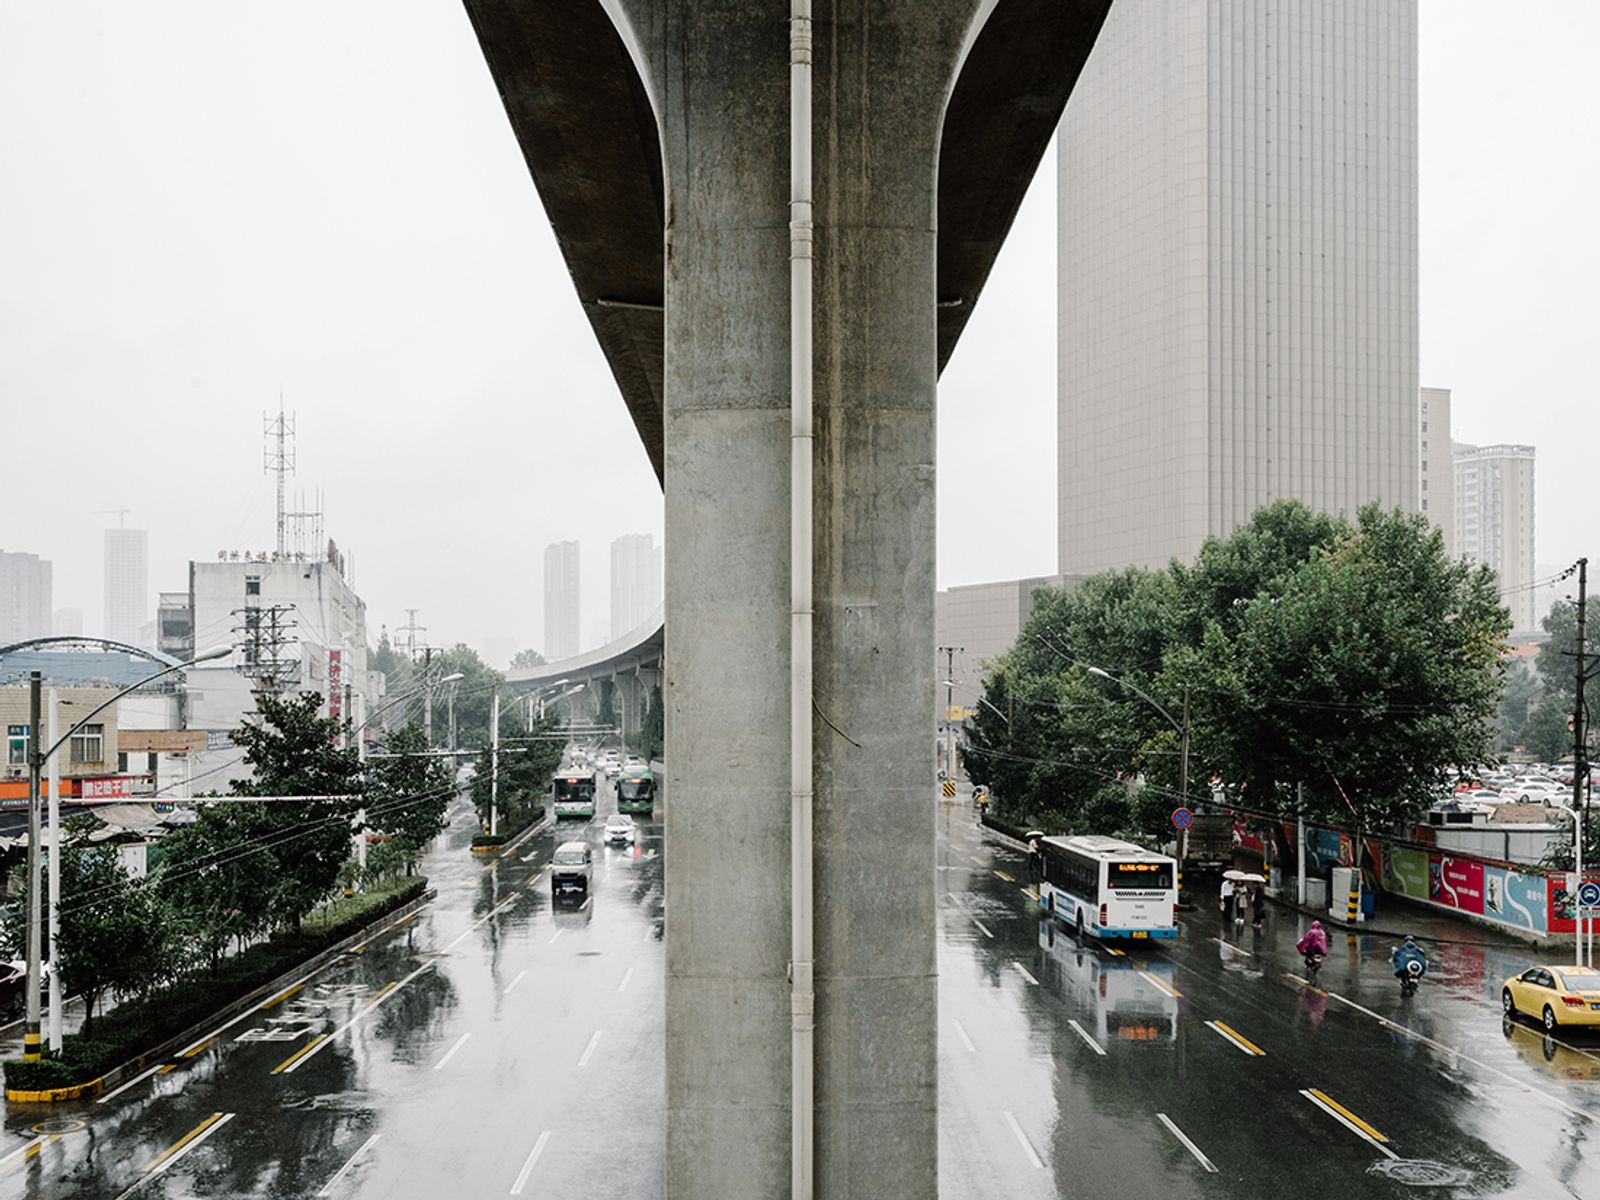 © Alessandro Zanoni - Image from the Wuhan boulevard photography project